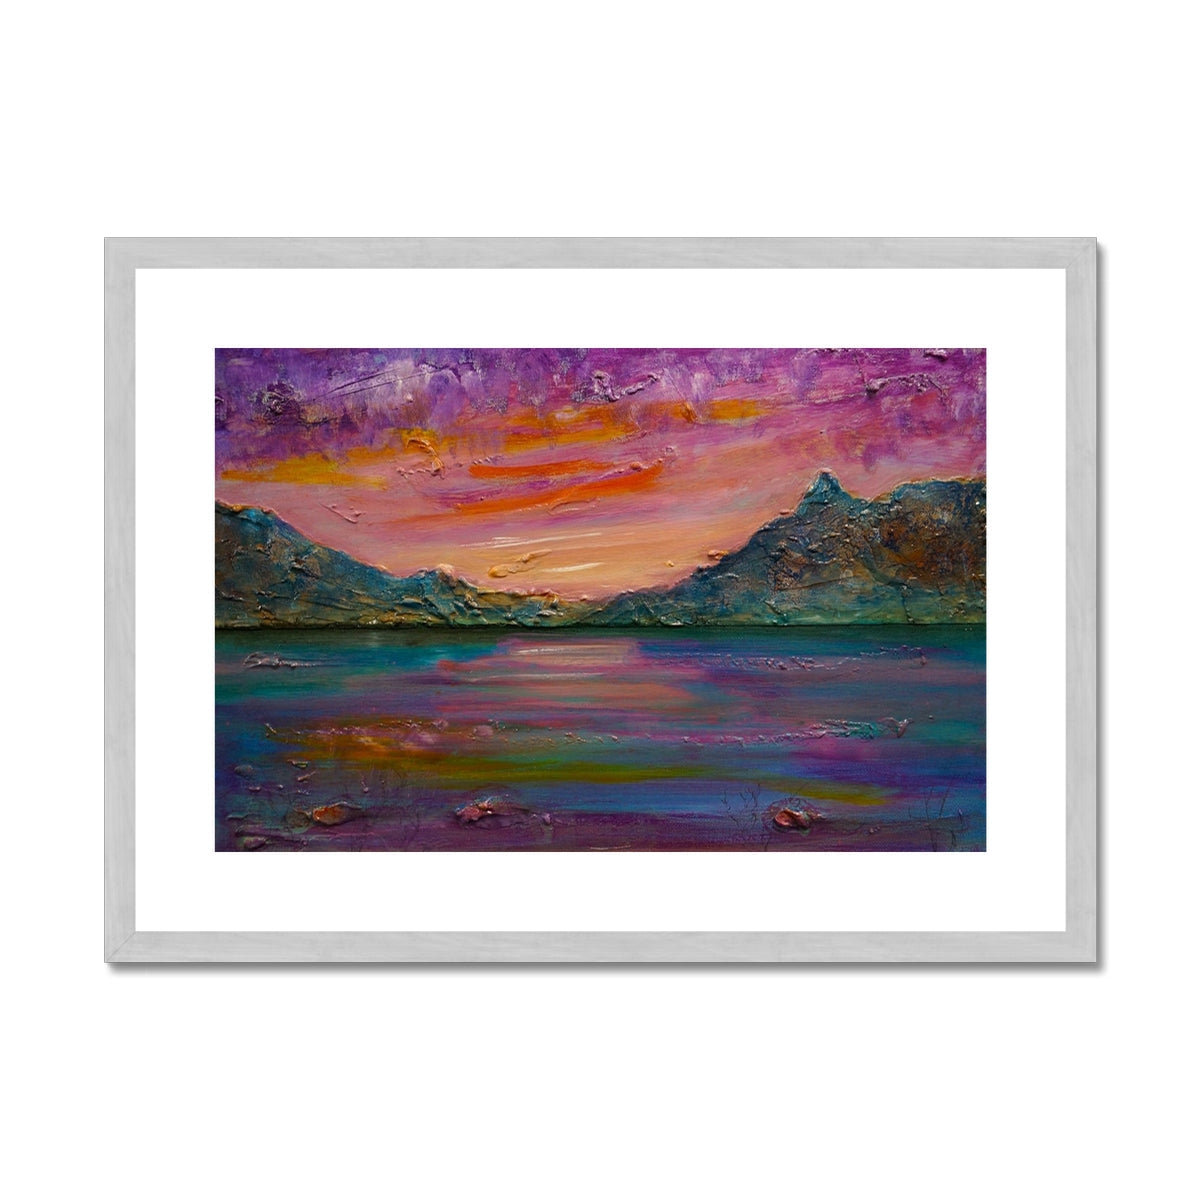 Loch Leven Sunset Painting | Antique Framed & Mounted Prints From Scotland-Antique Framed & Mounted Prints-Scottish Lochs & Mountains Art Gallery-A2 Landscape-Silver Frame-Paintings, Prints, Homeware, Art Gifts From Scotland By Scottish Artist Kevin Hunter